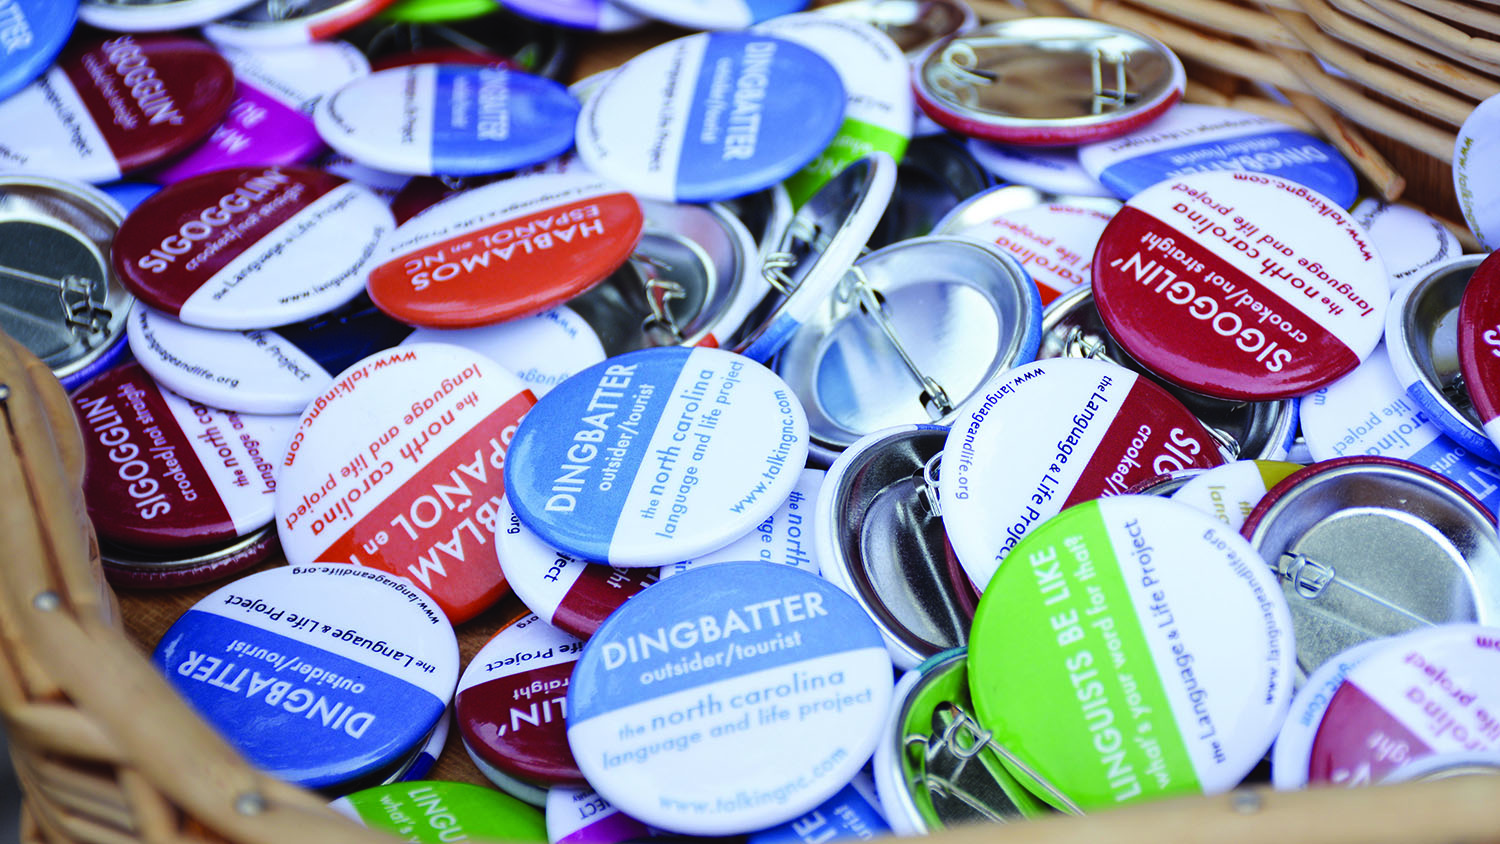 A basket of buttons features North Carolina phrases.